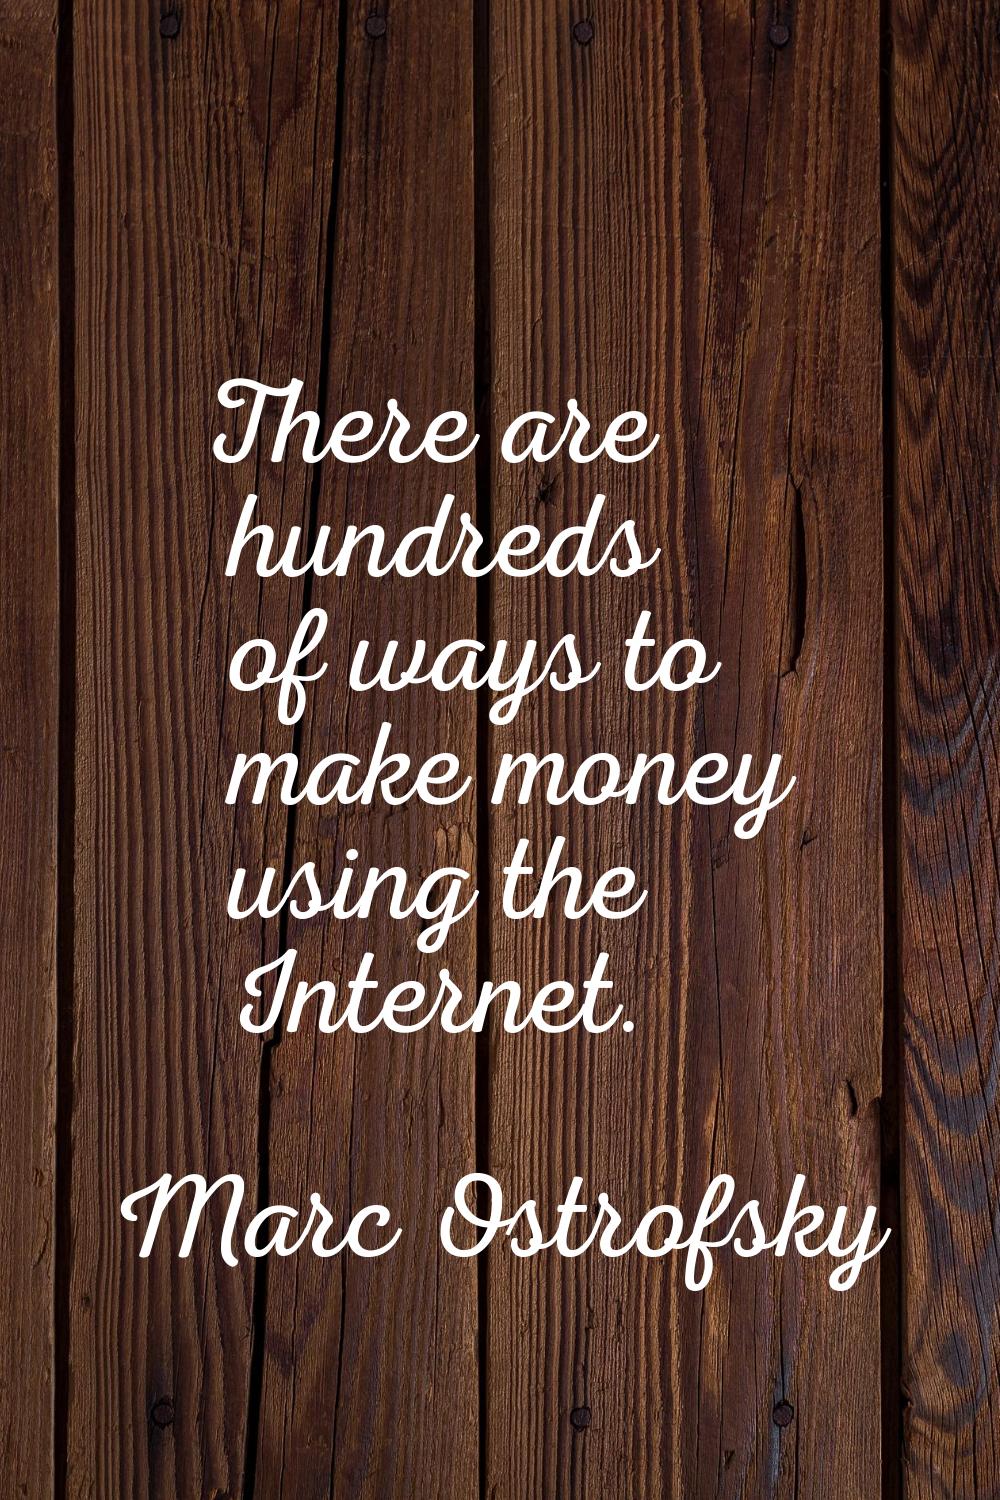 There are hundreds of ways to make money using the Internet.